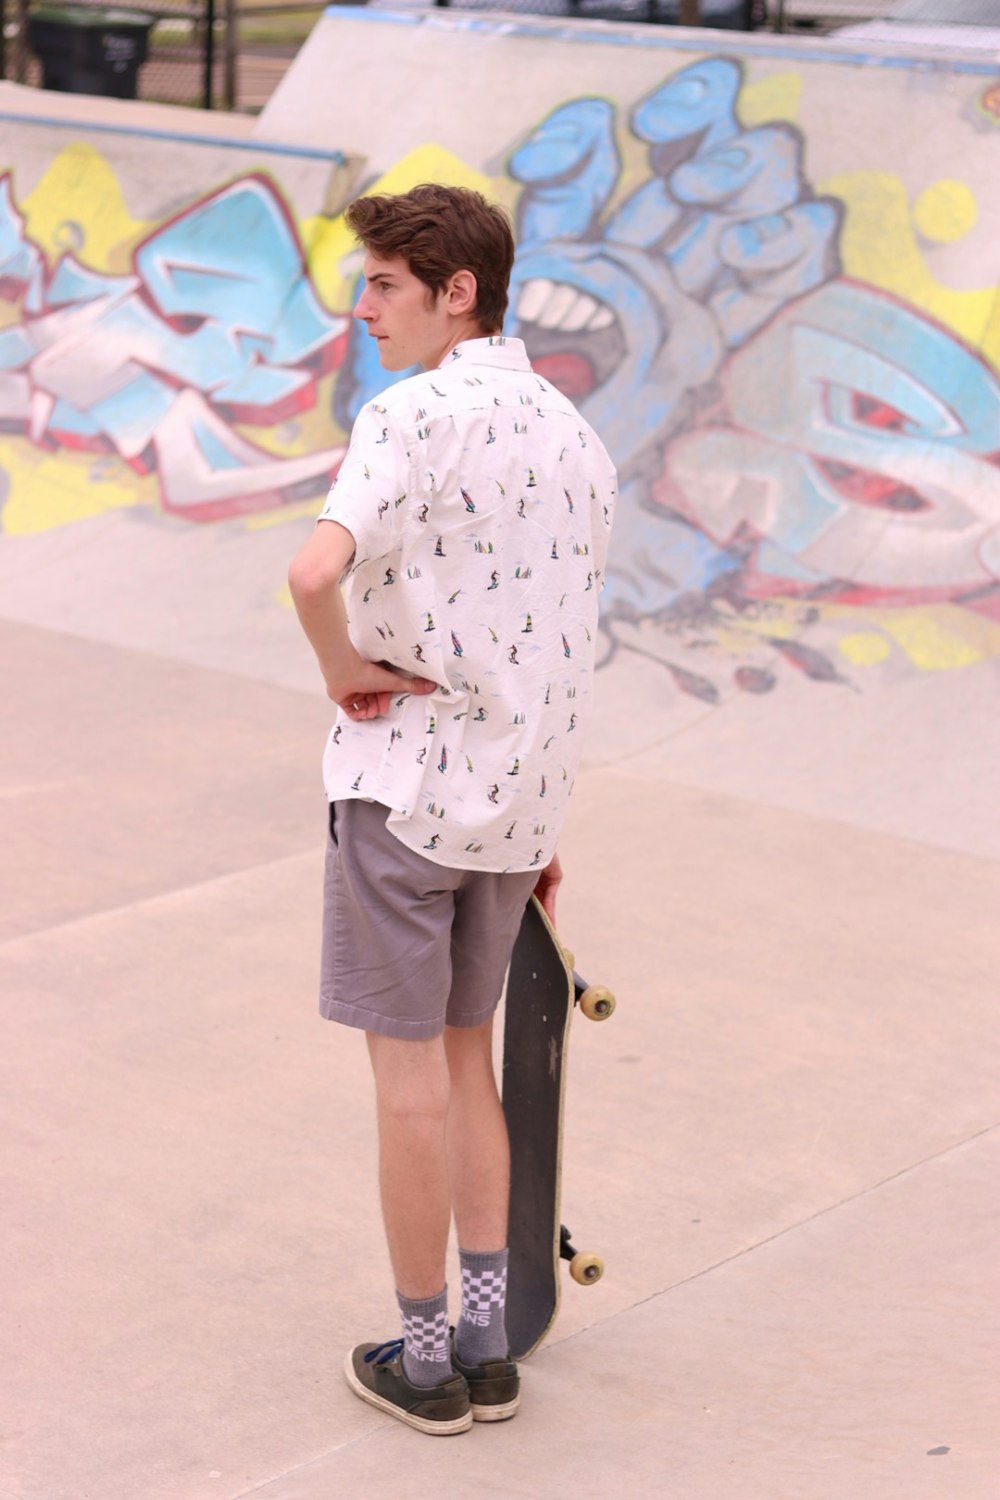 a young man holding a skateboard at a skate park